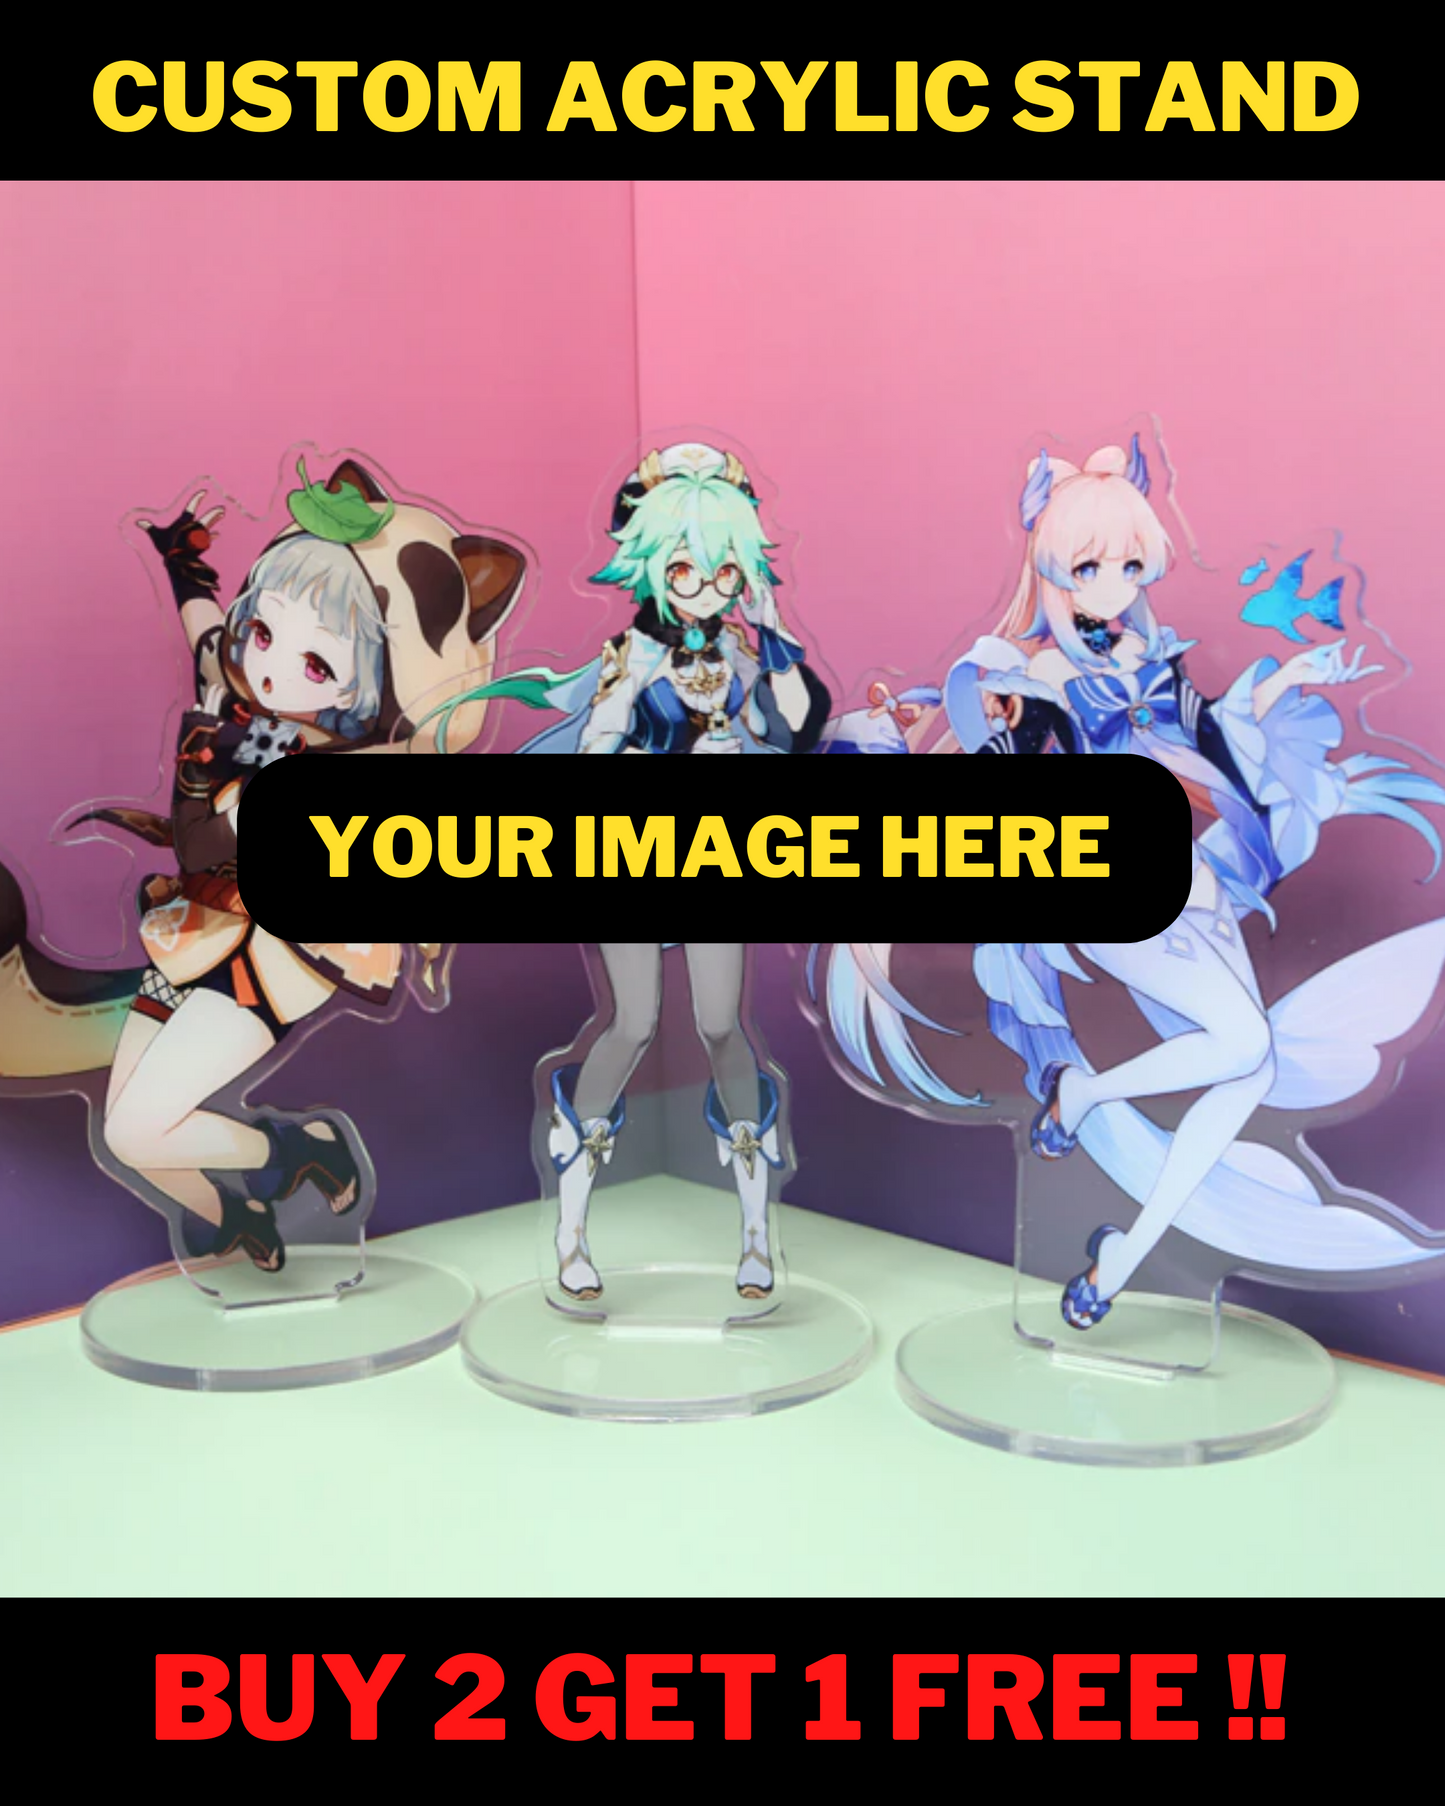 Custom Acrylic Stand | Anime Acrylic Stand | Rainbow and Holographic stand | Bundle offer